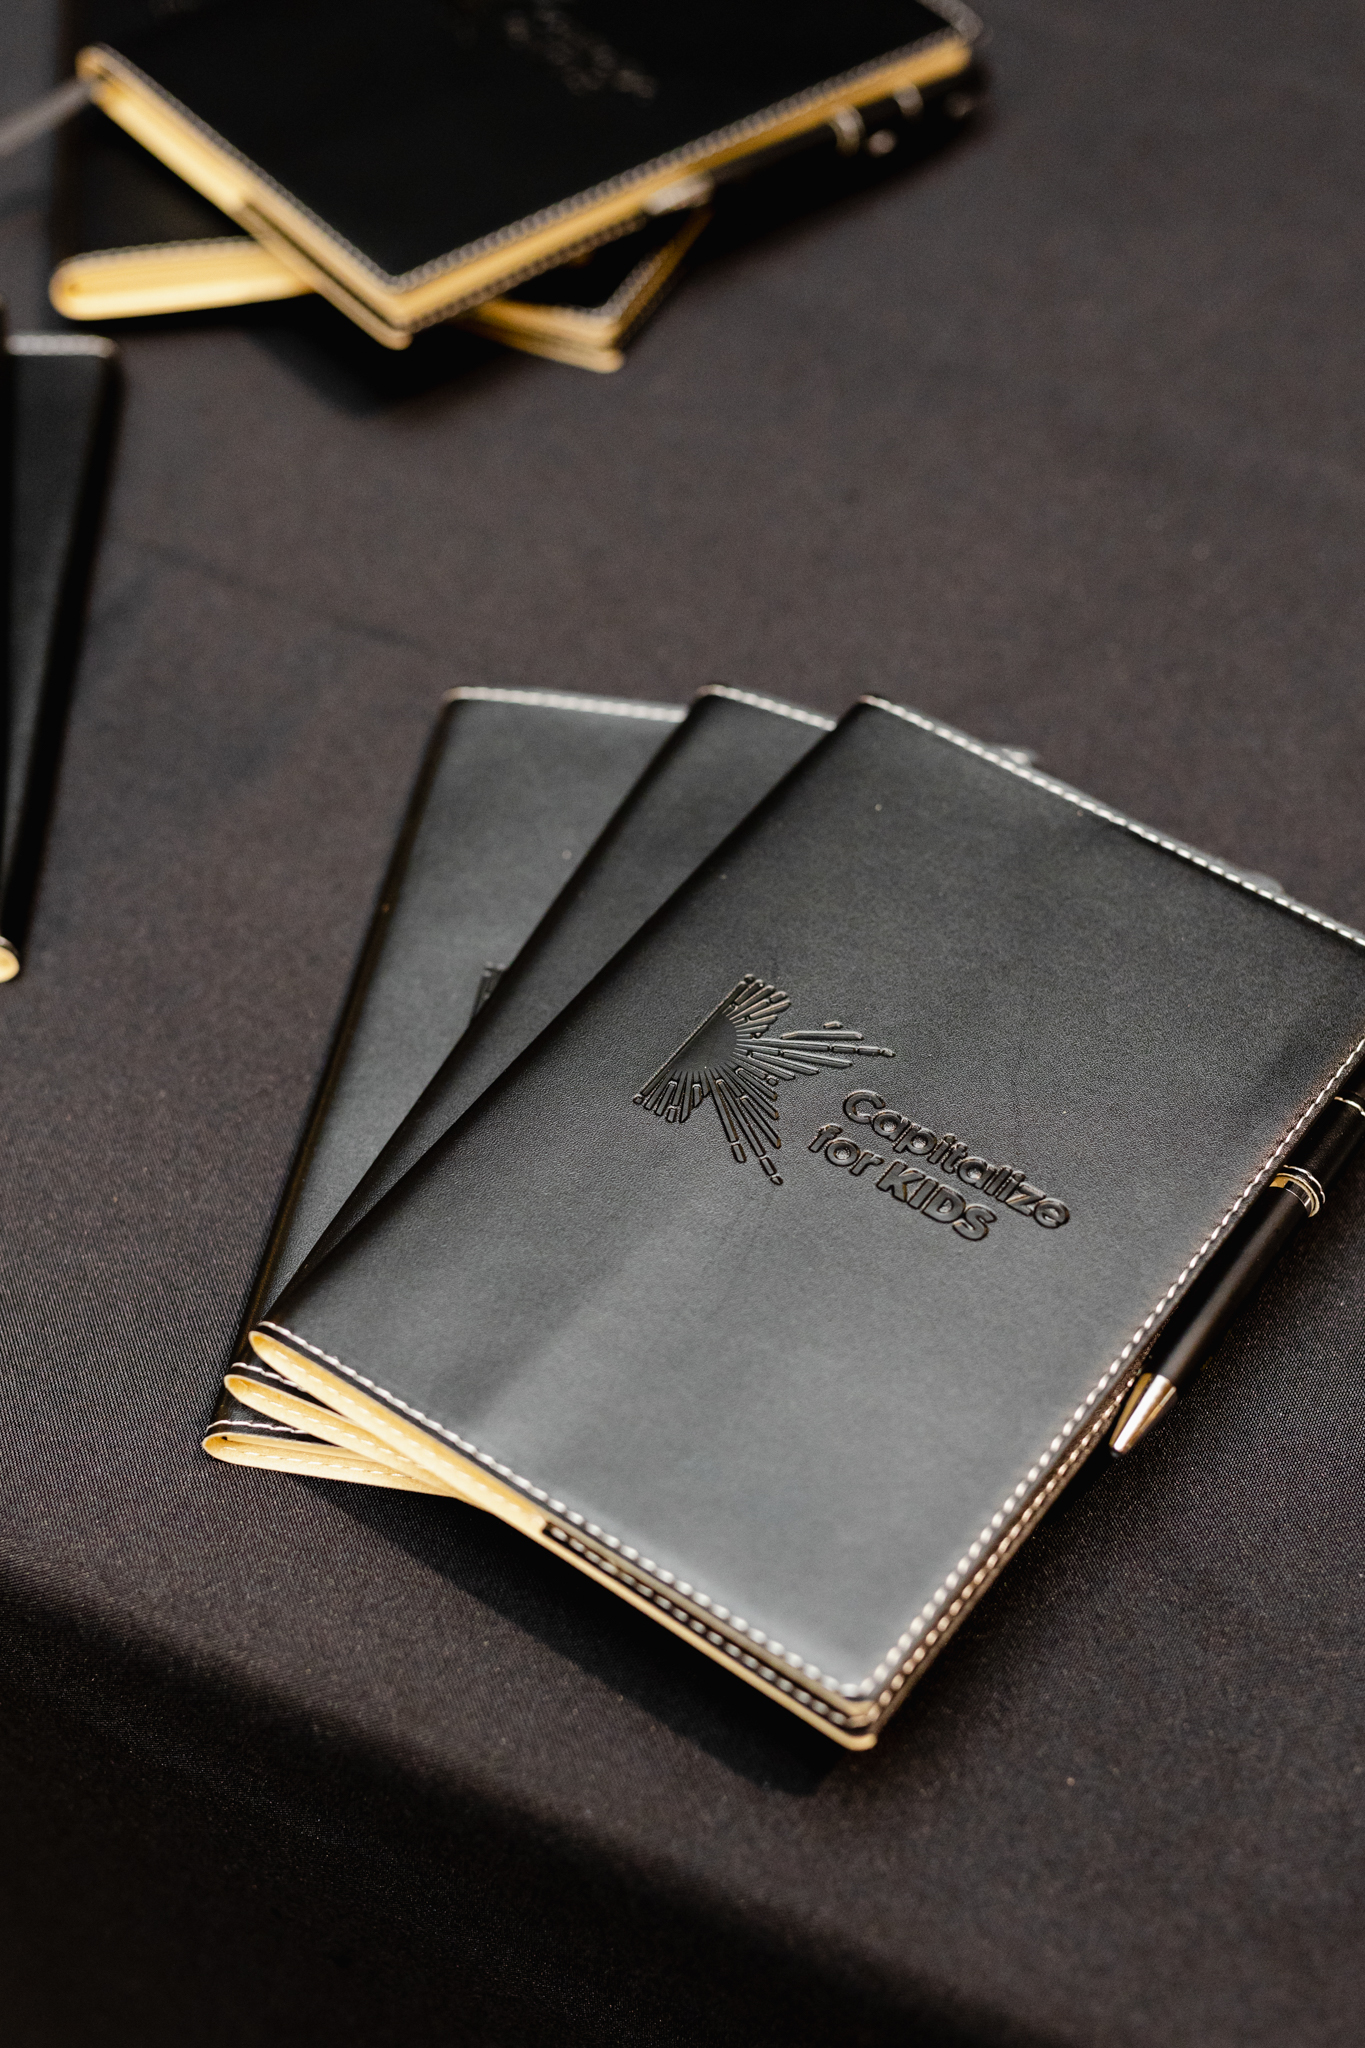 Conference attendees will find a striking display of black and gold notebooks elegantly arranged on a table.